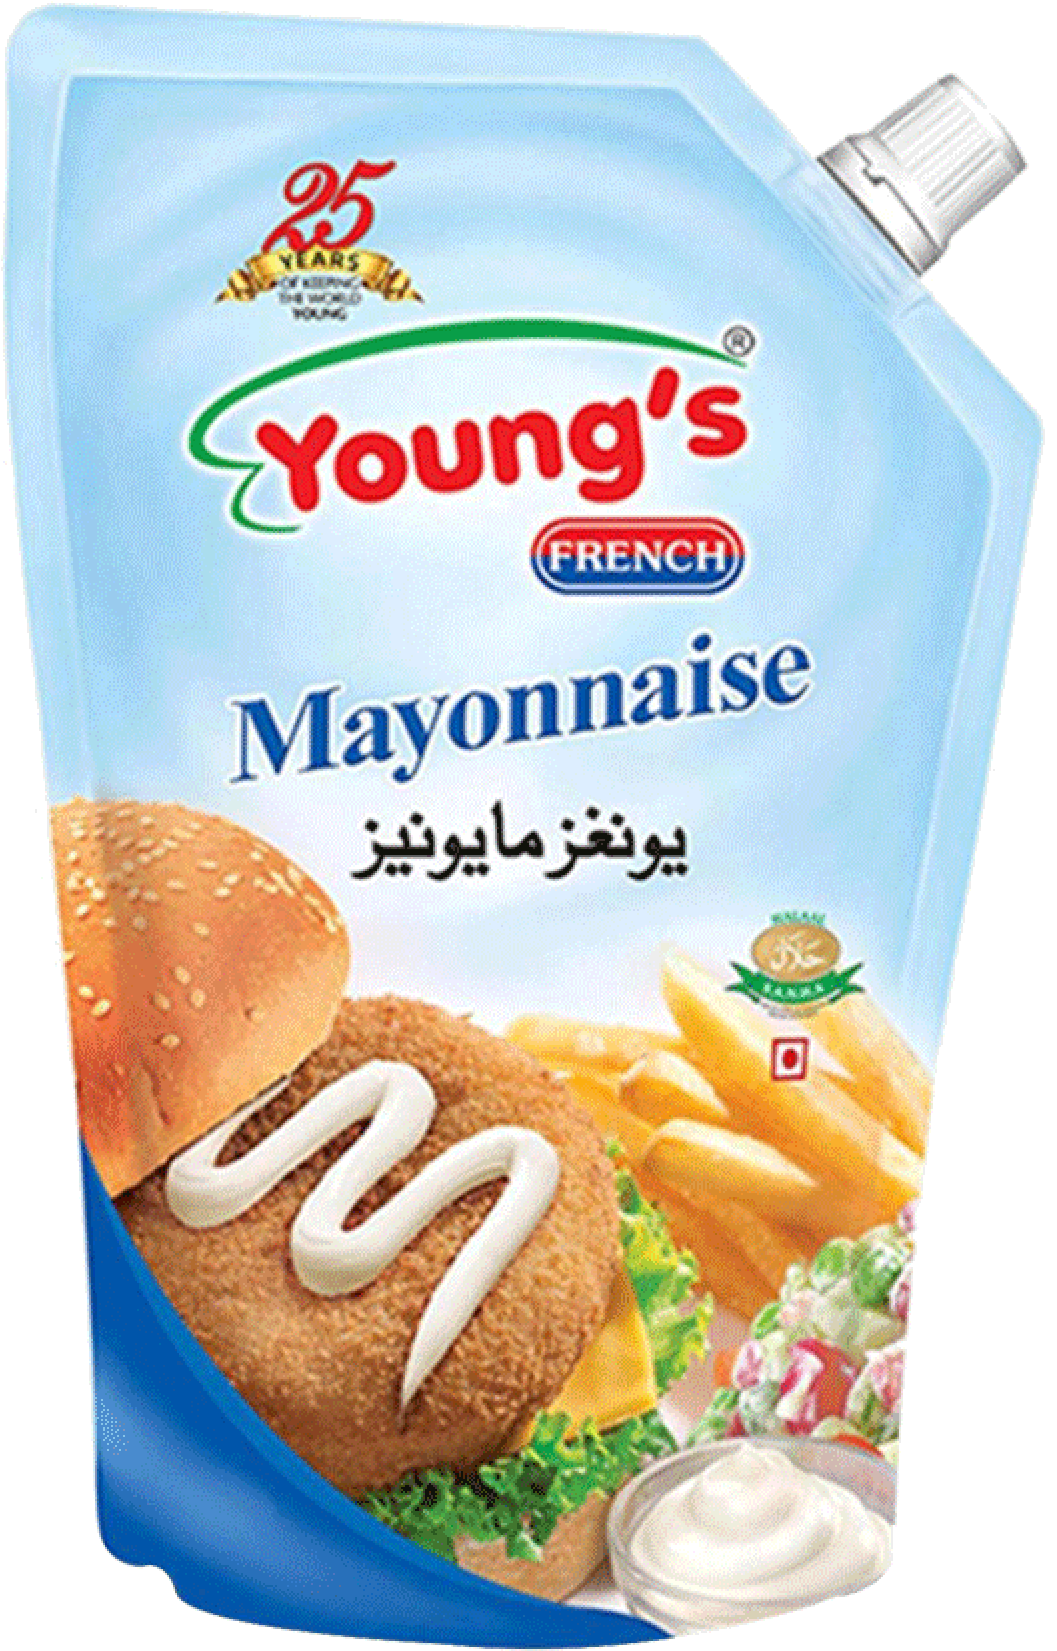 Youngs French Mayonnaise Pouch Product Image PNG image